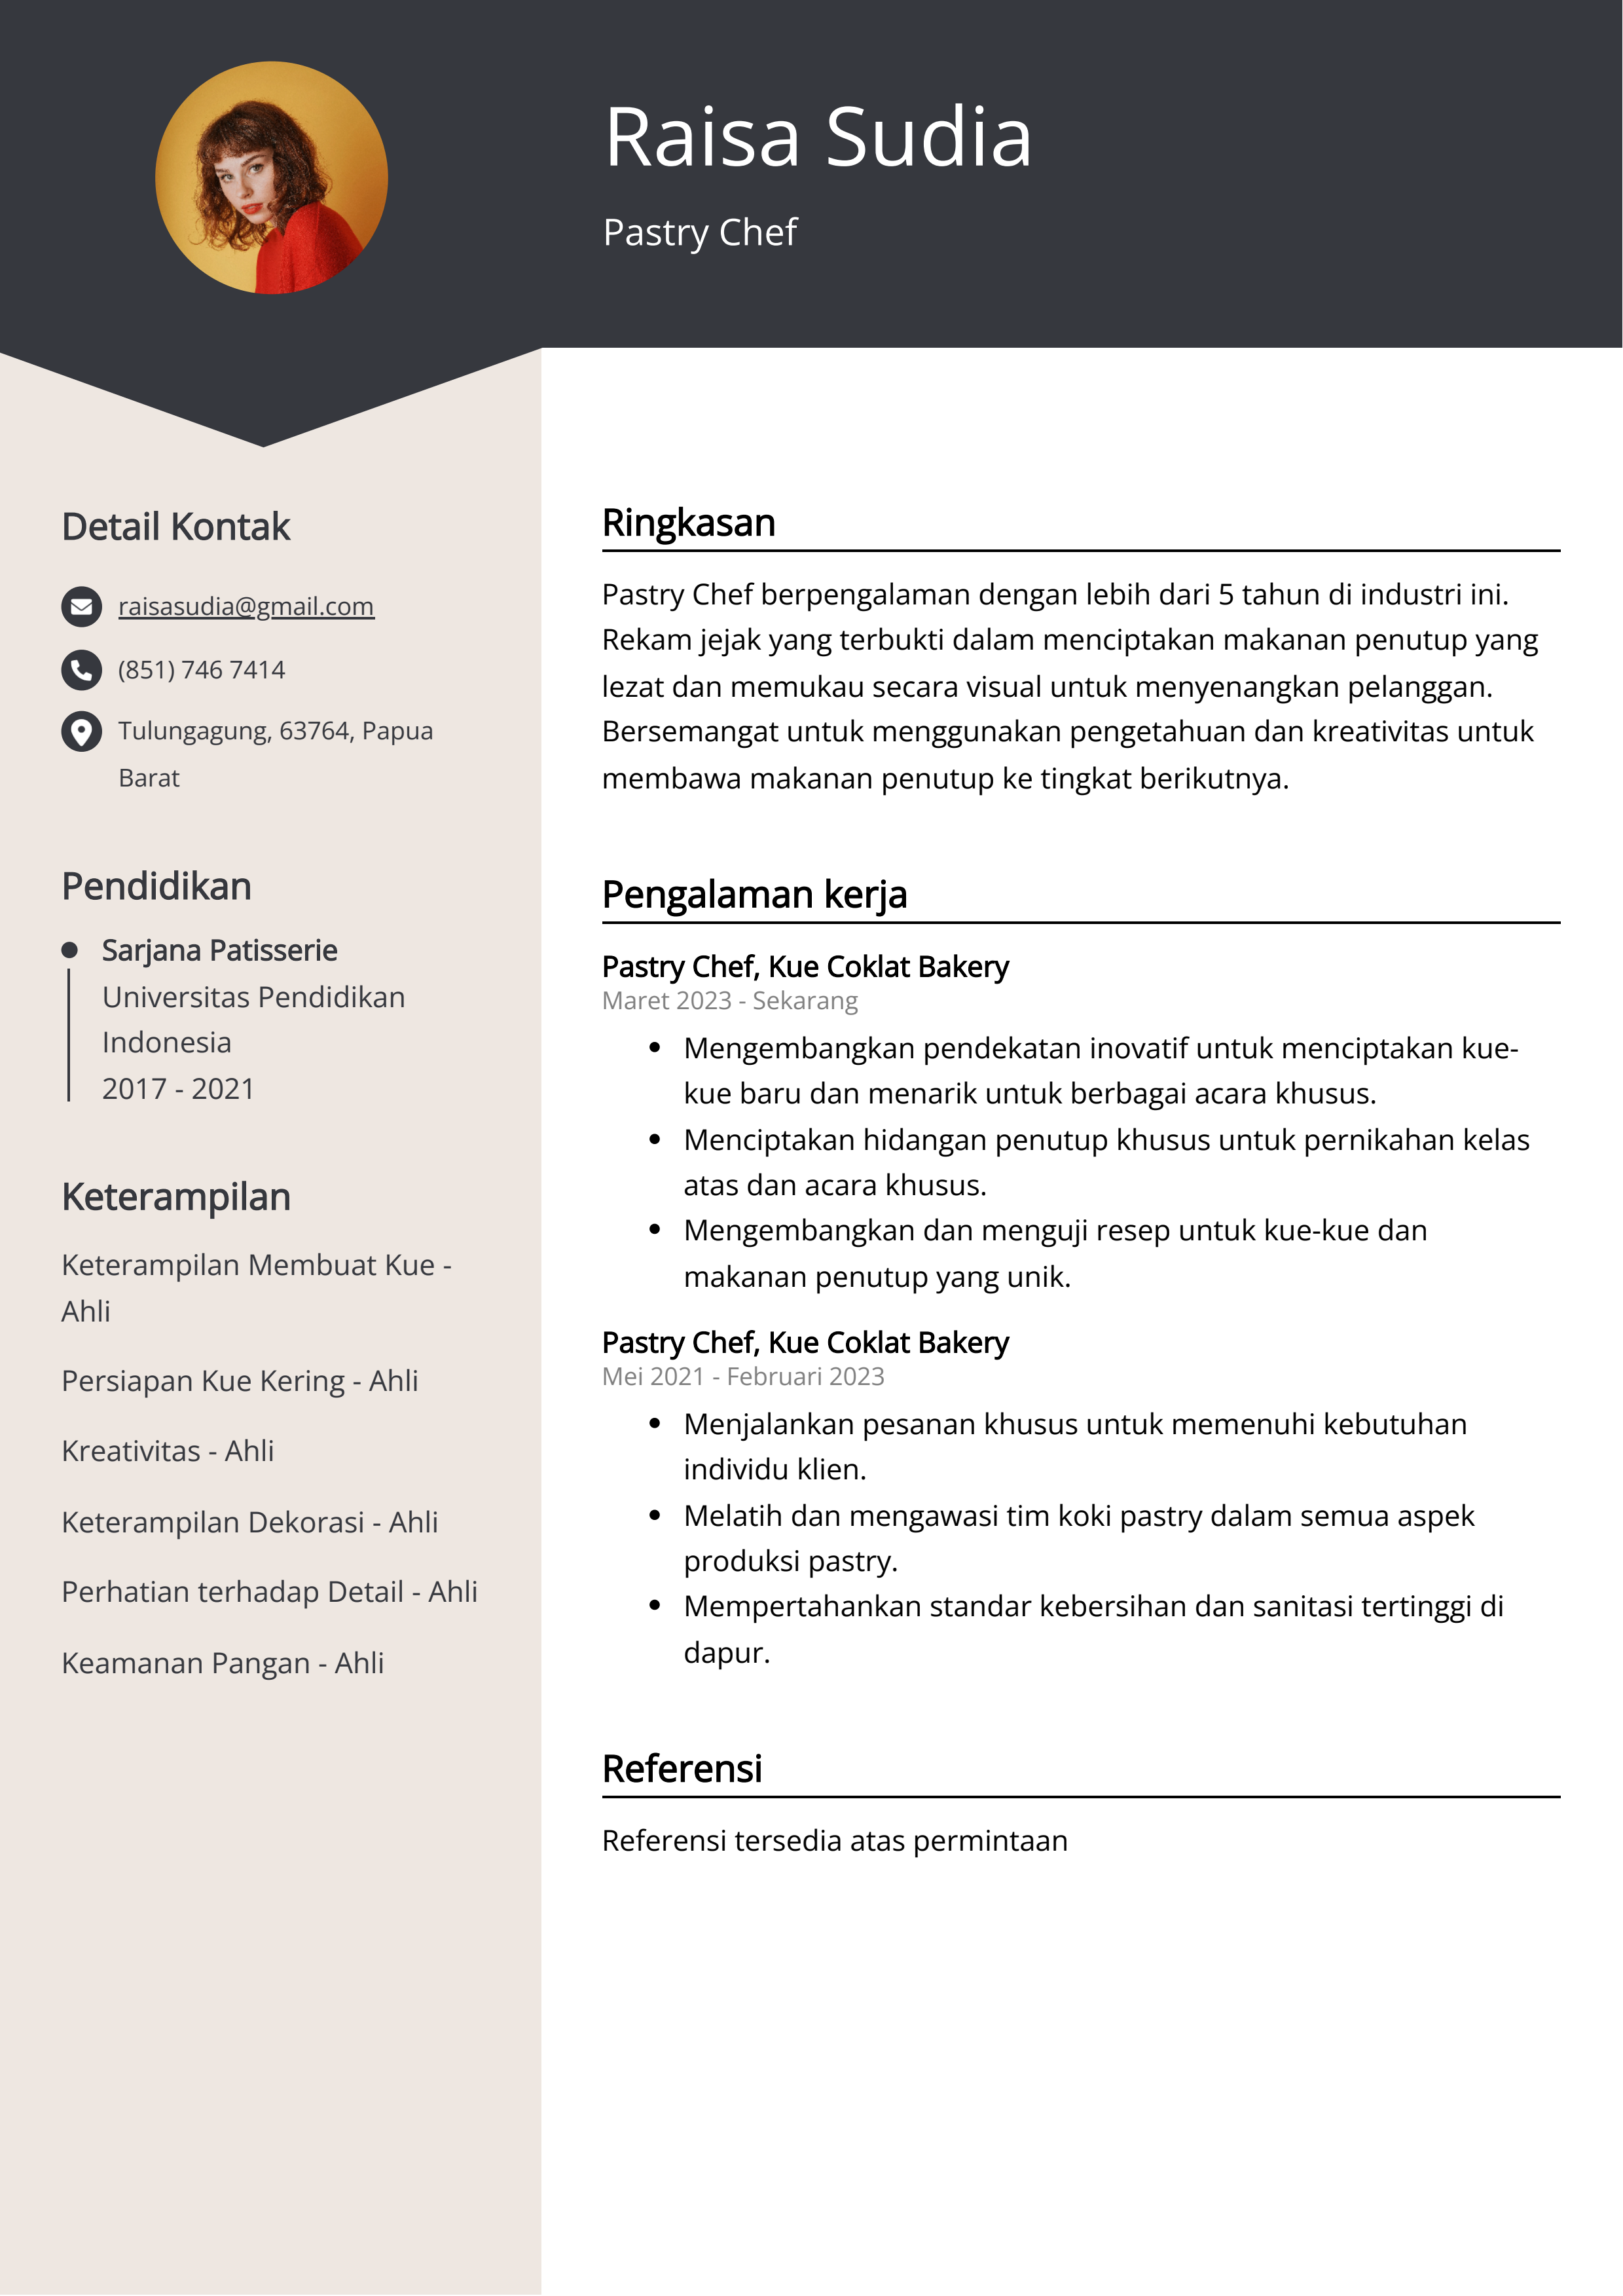 Contoh Resume Pastry Chef